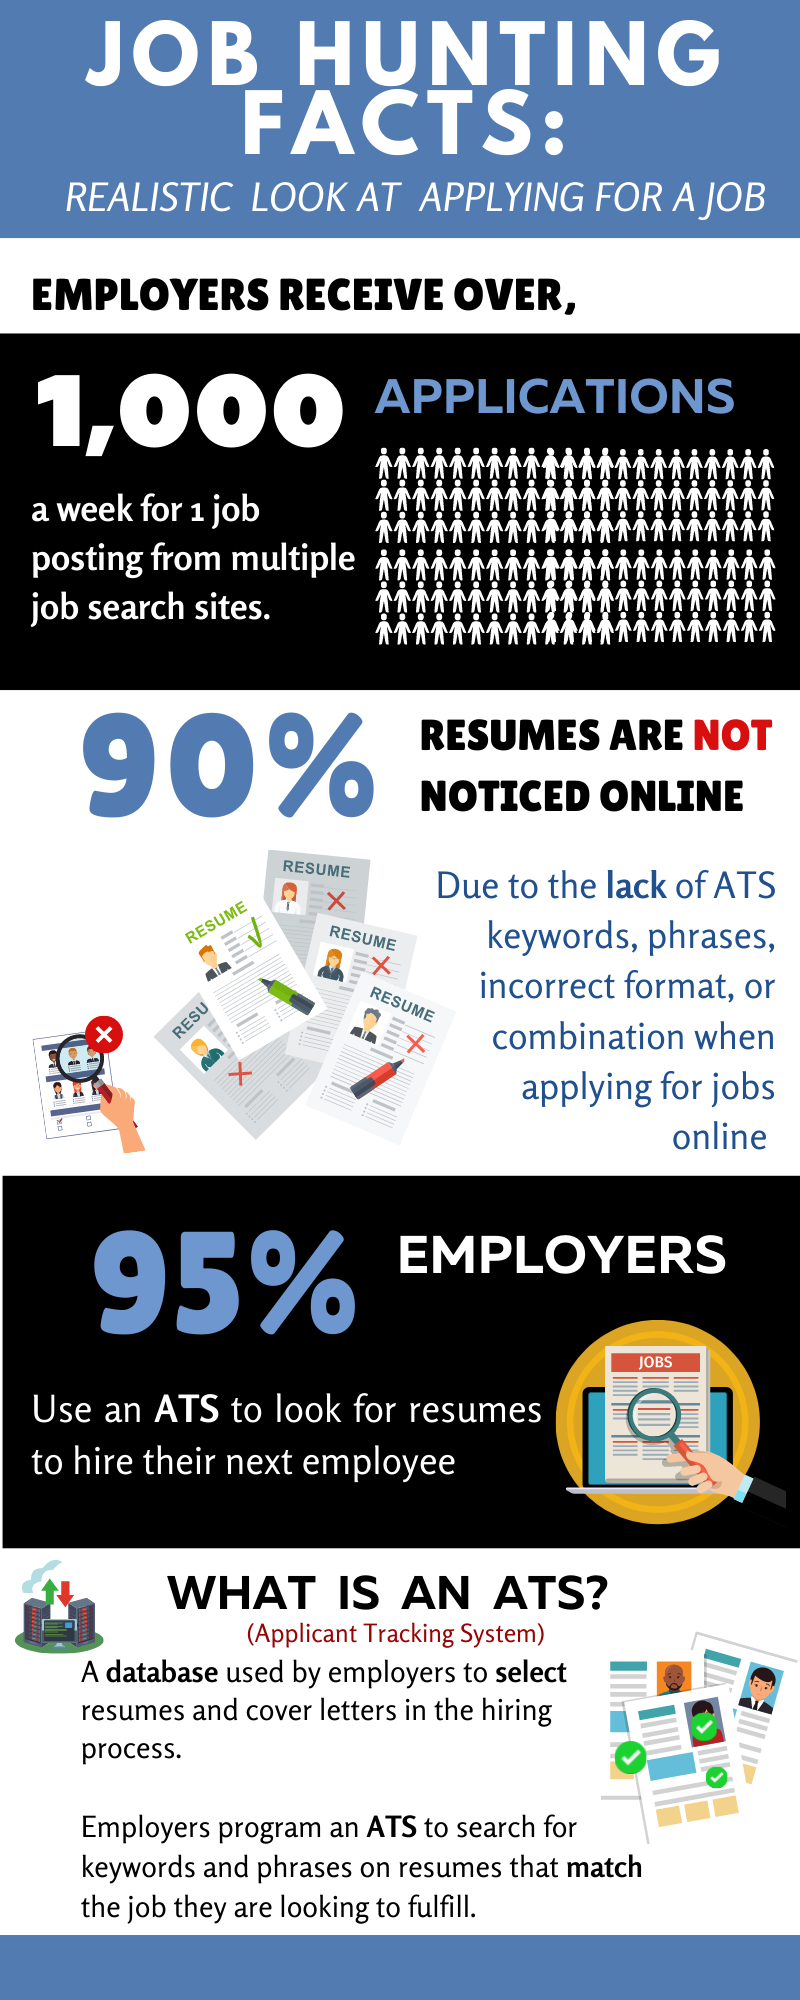 To apply online for a job online you need an ATS resume builder.  A simple resume will get noticed and pushed through to a hiring manager.